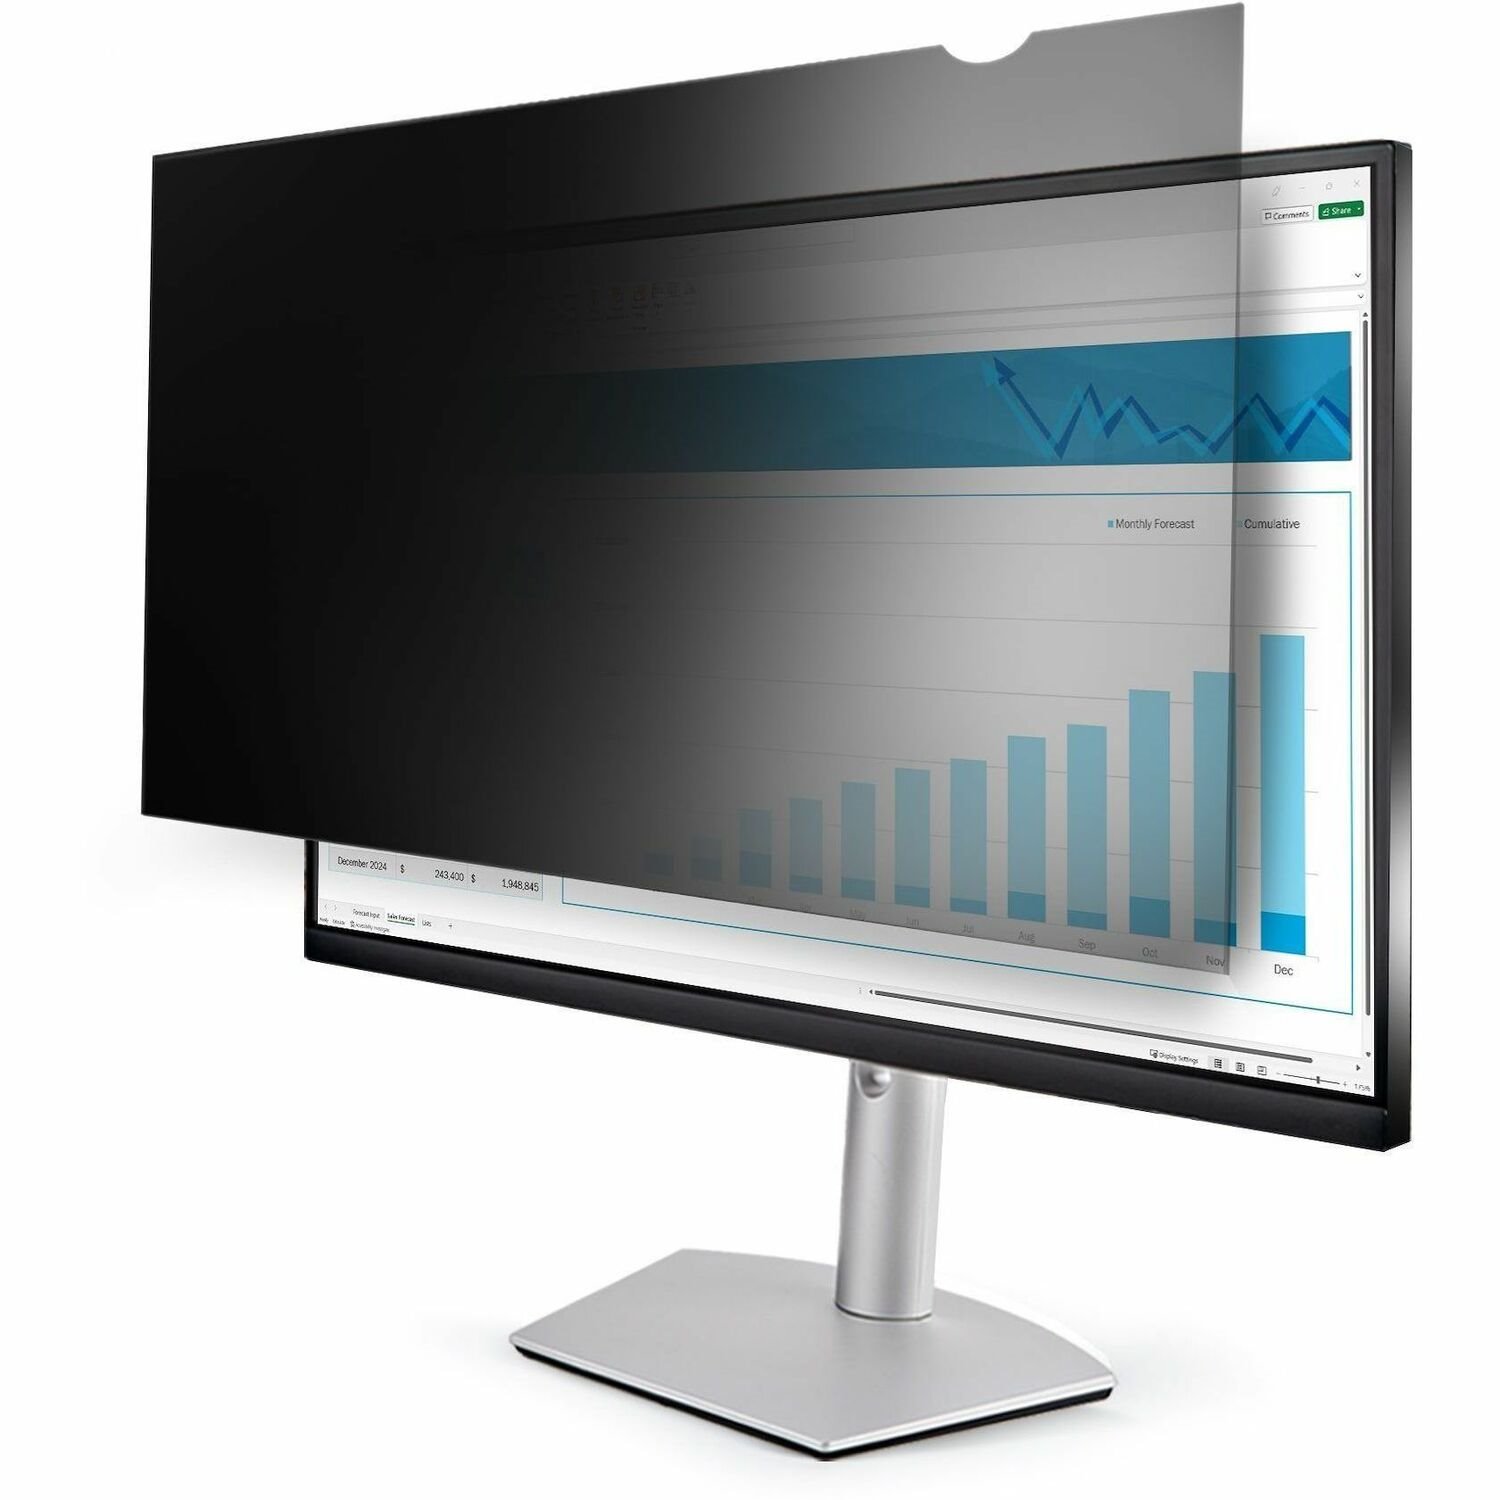 StarTech.com 31.5-inch 16:9 Computer Monitor Privacy Screen, Anti-Glare Privacy Filter w/Blue Light Reduction, +/- 30&deg; View Security Shield